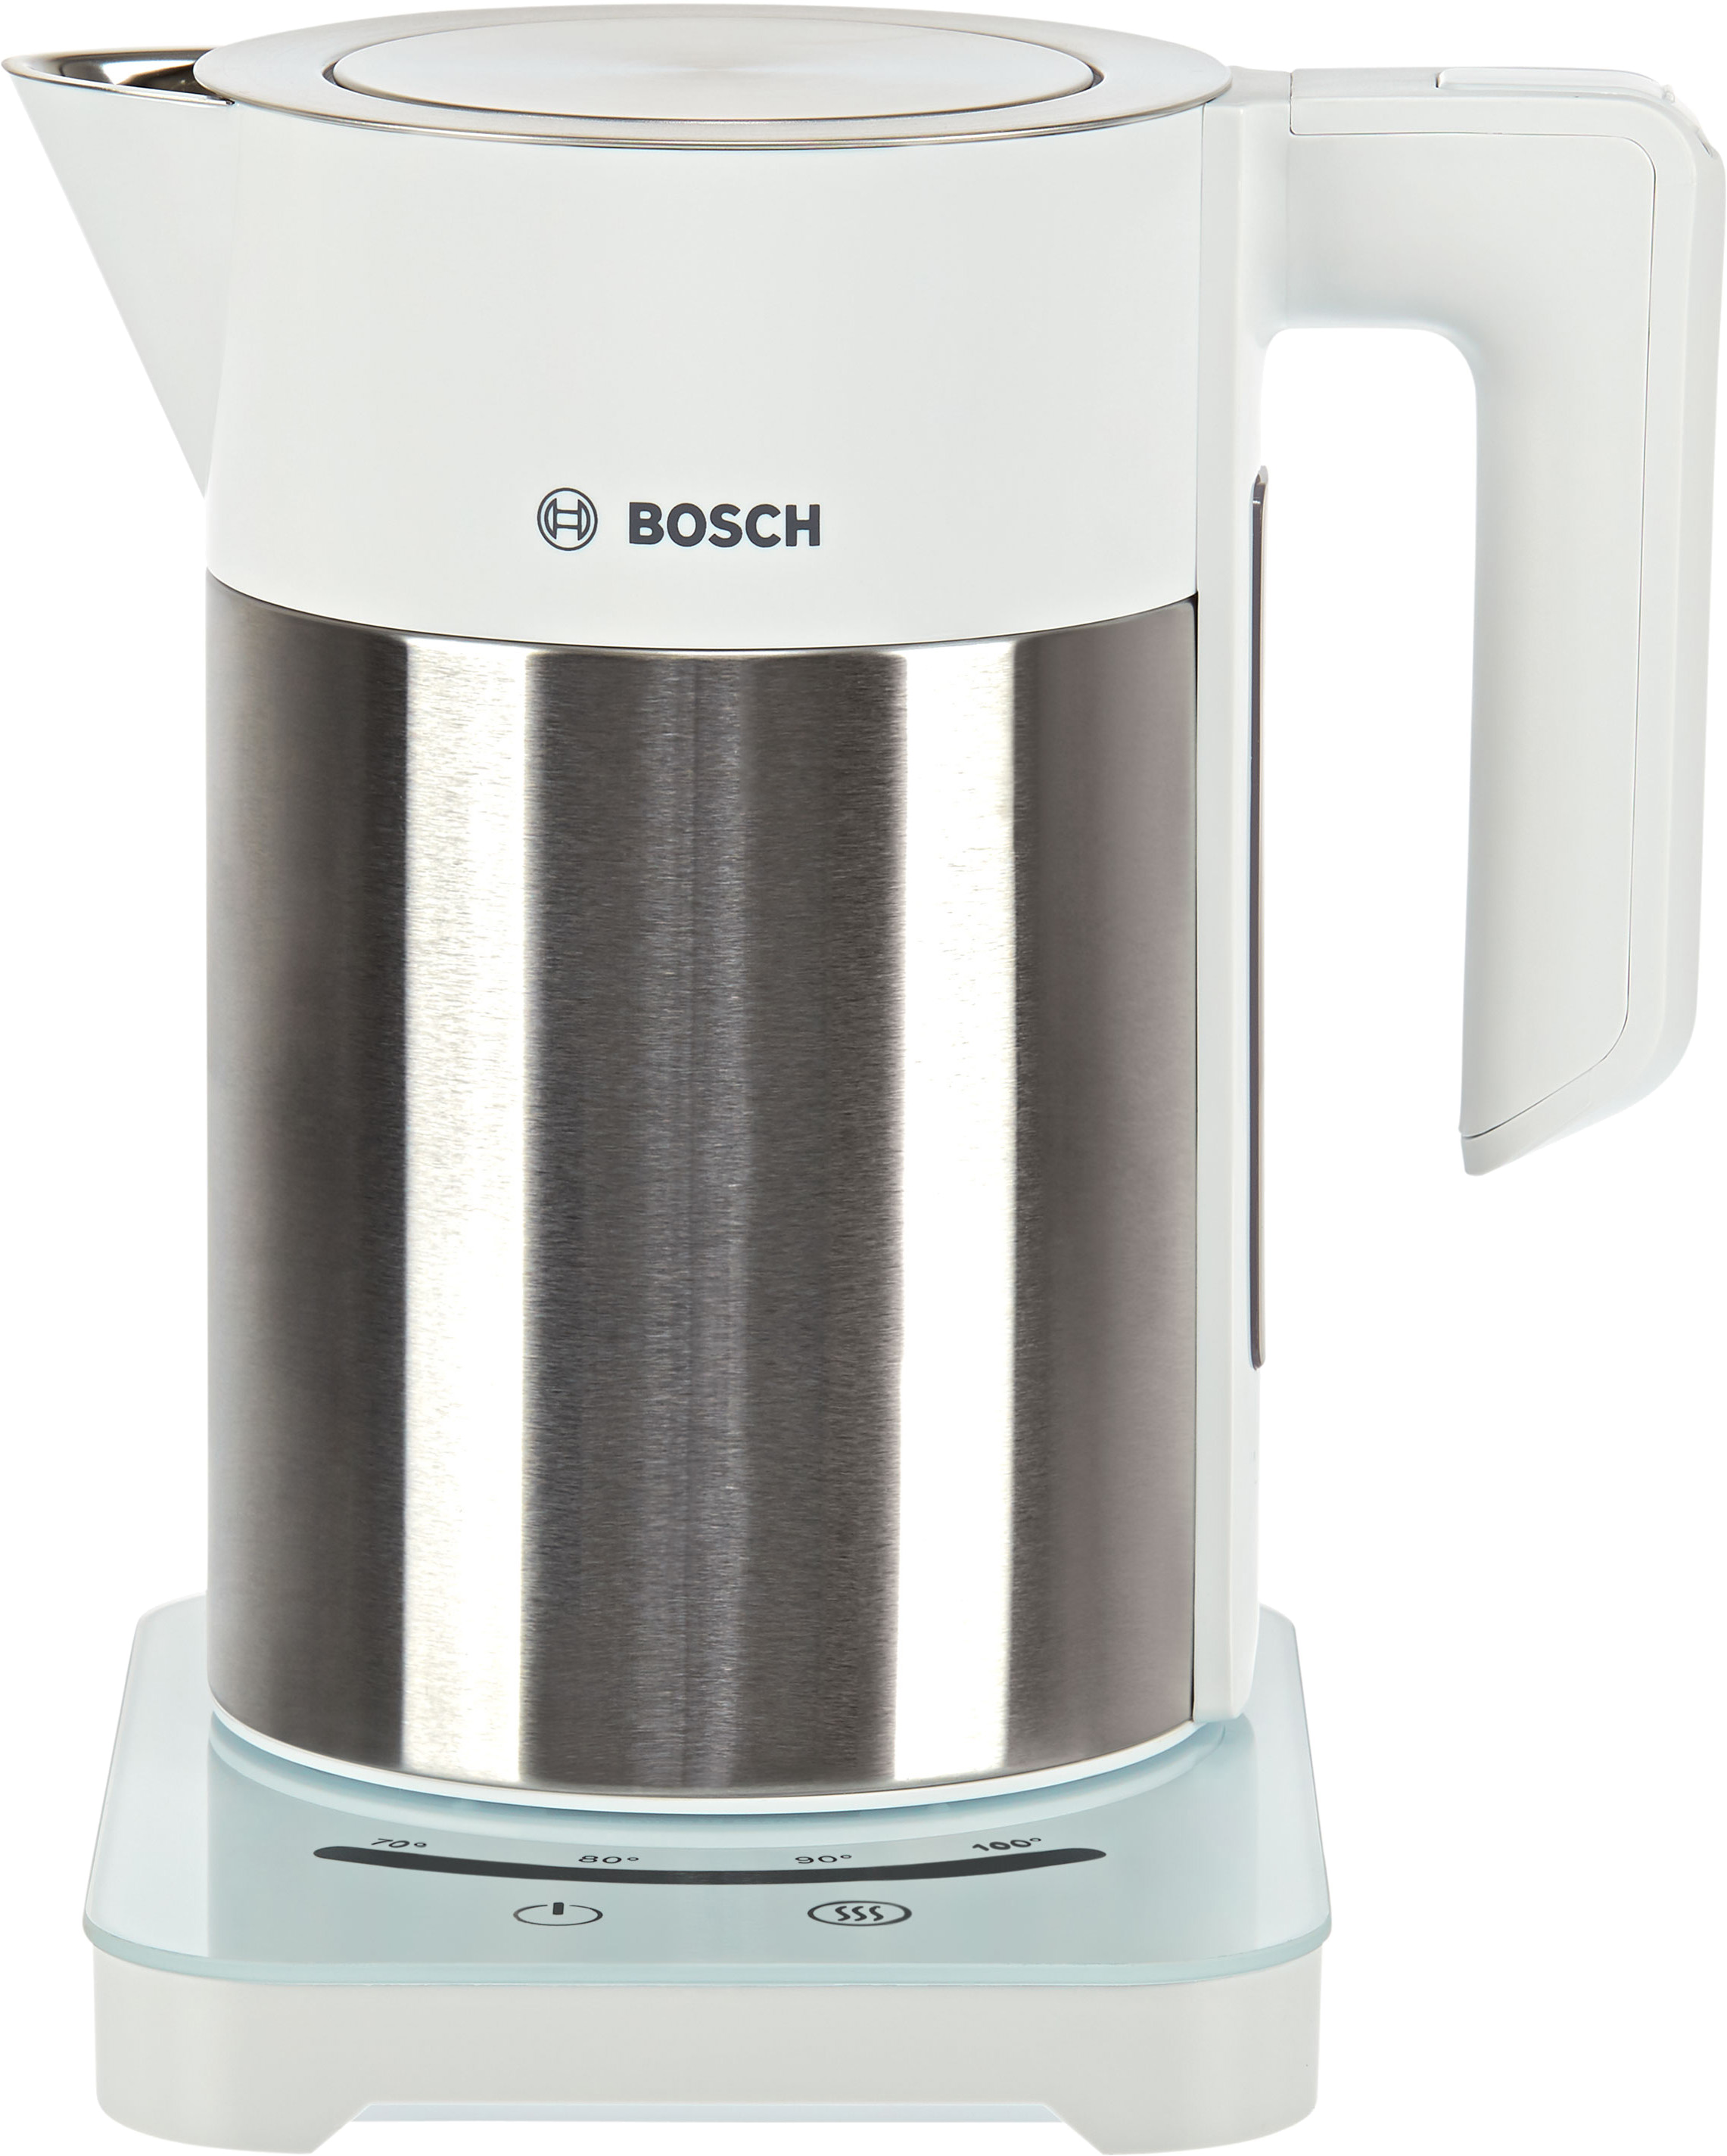 Bosch Sky TWK7201GB Kettle with Temperature Selector - White / Silver, White